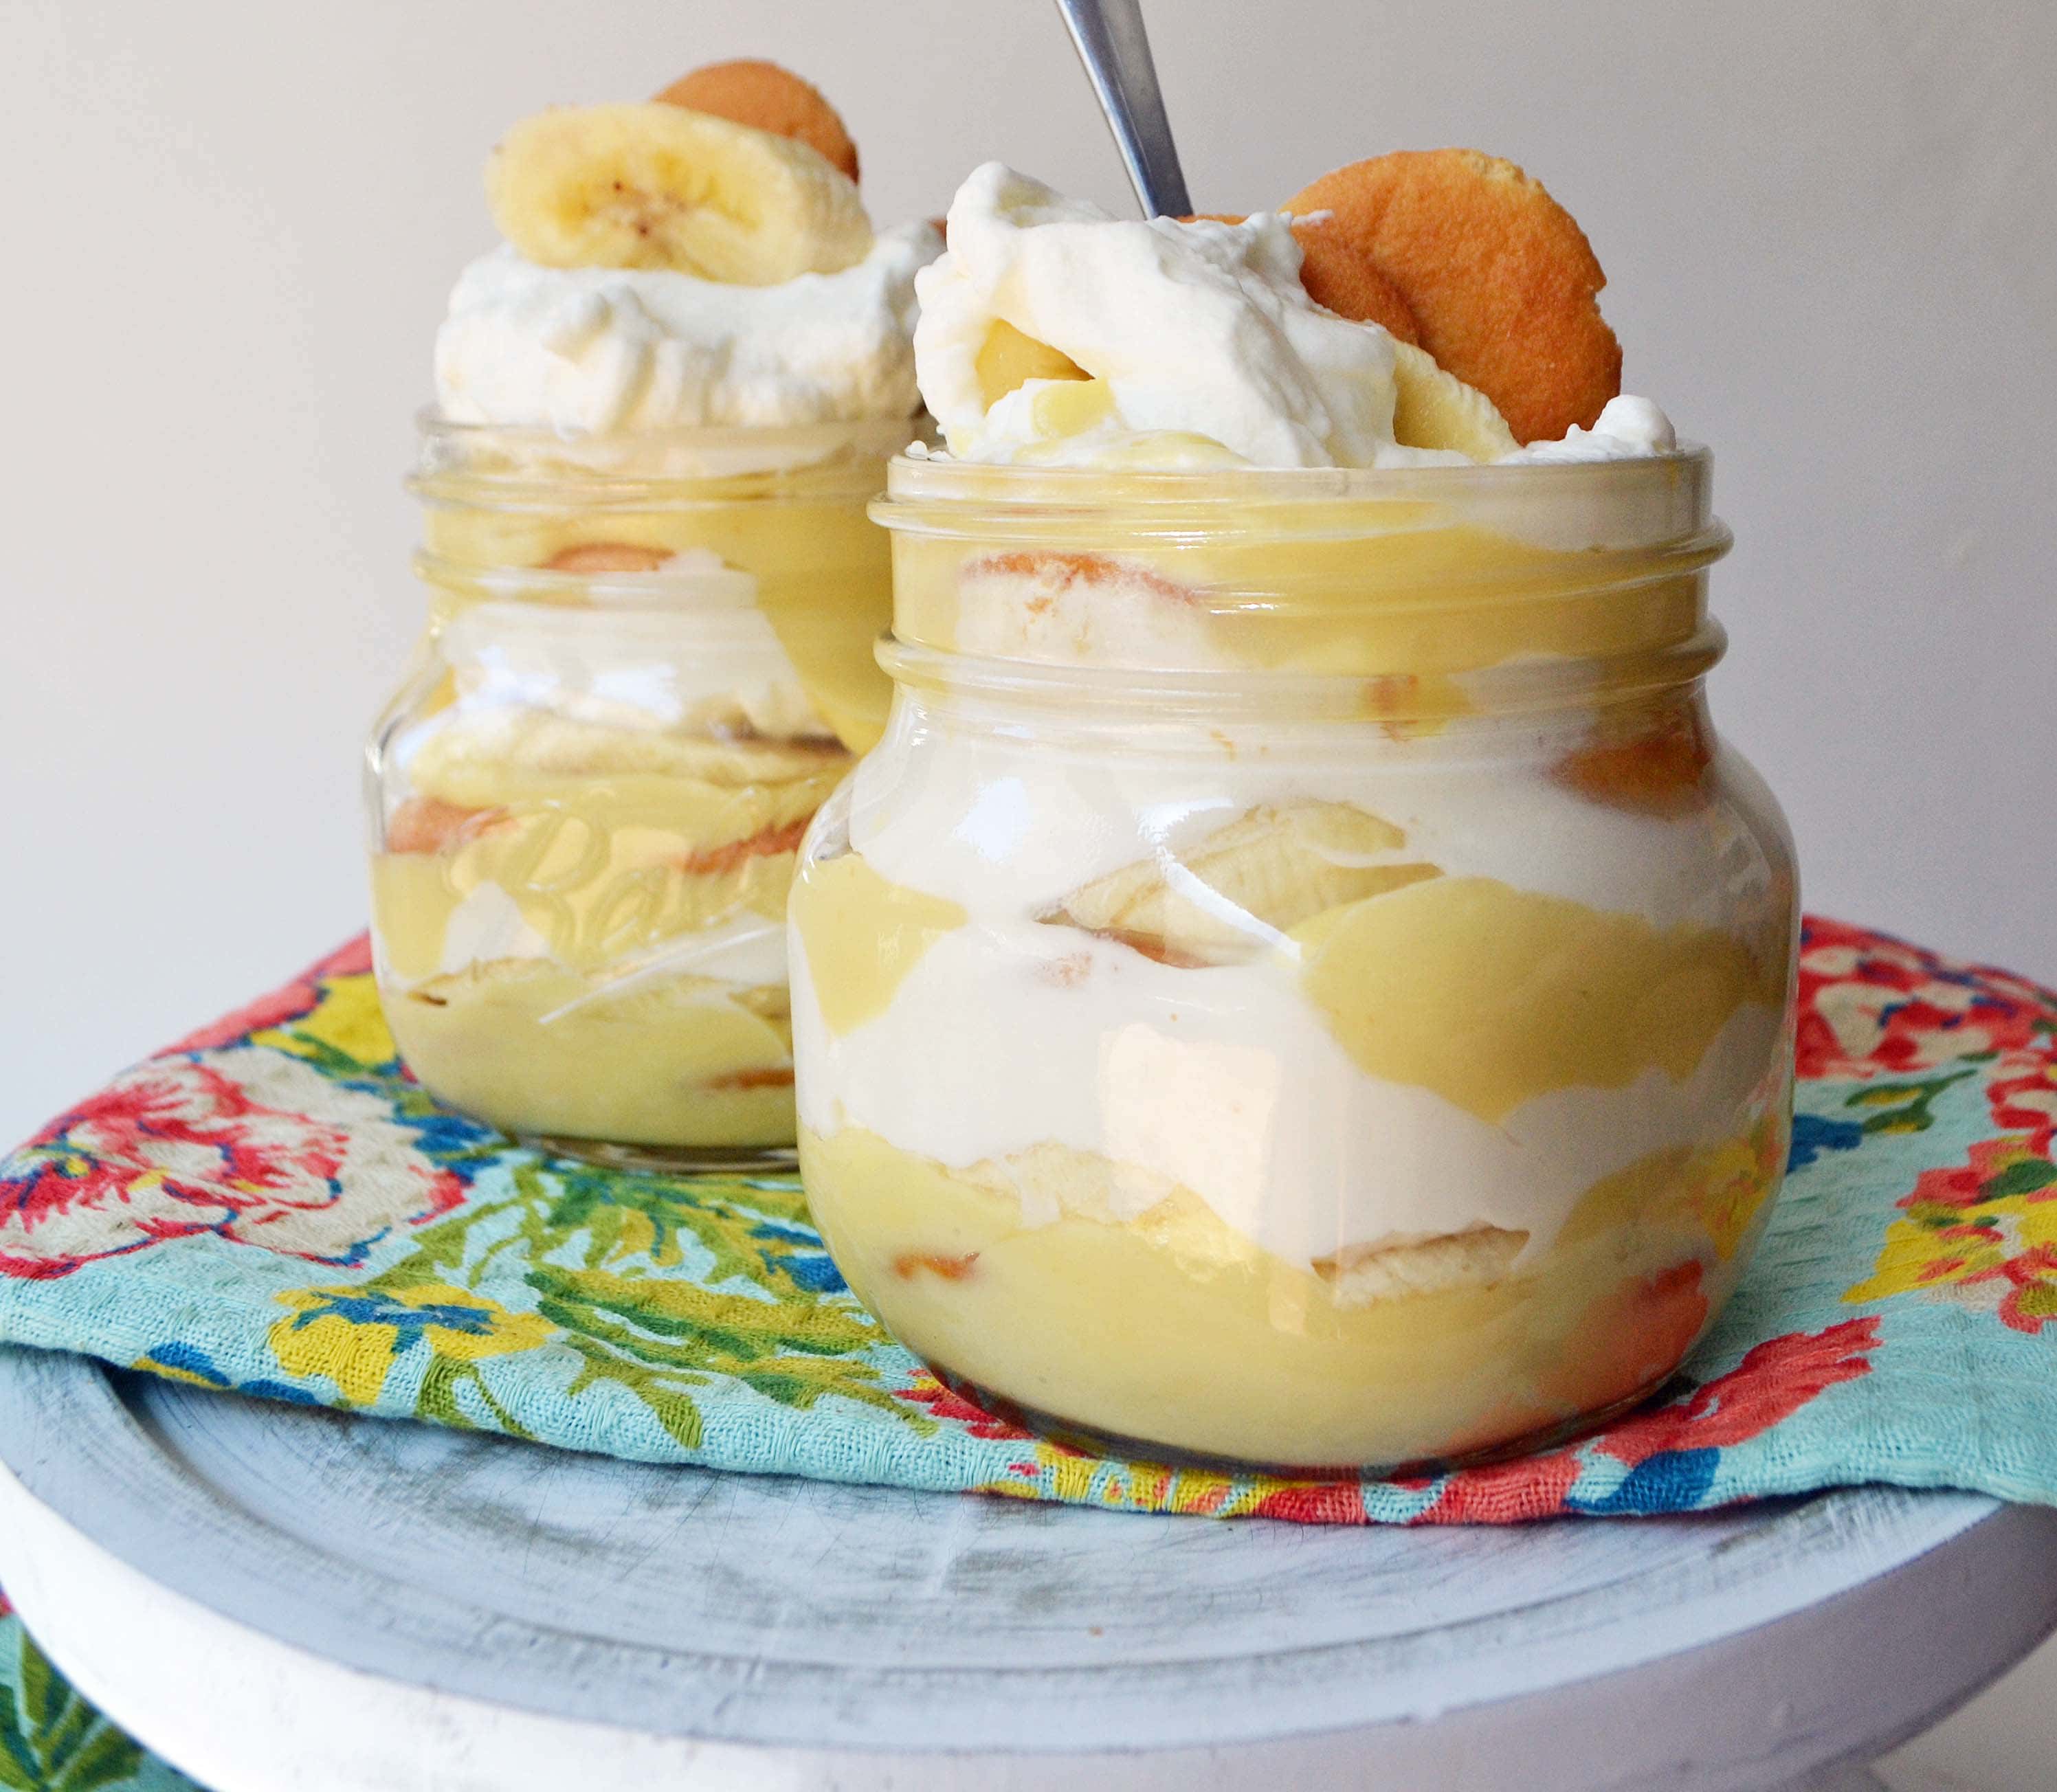 Homemade Banana Pudding Dessert Recipe. Slow cooked vanilla bean custard layered with fresh bananas, nilla wafers and fluffy whipped cream. A perfect Southern dessert and homemade Magnolia Bakery copycat with made from scratch pudding. www.modernhoney.com